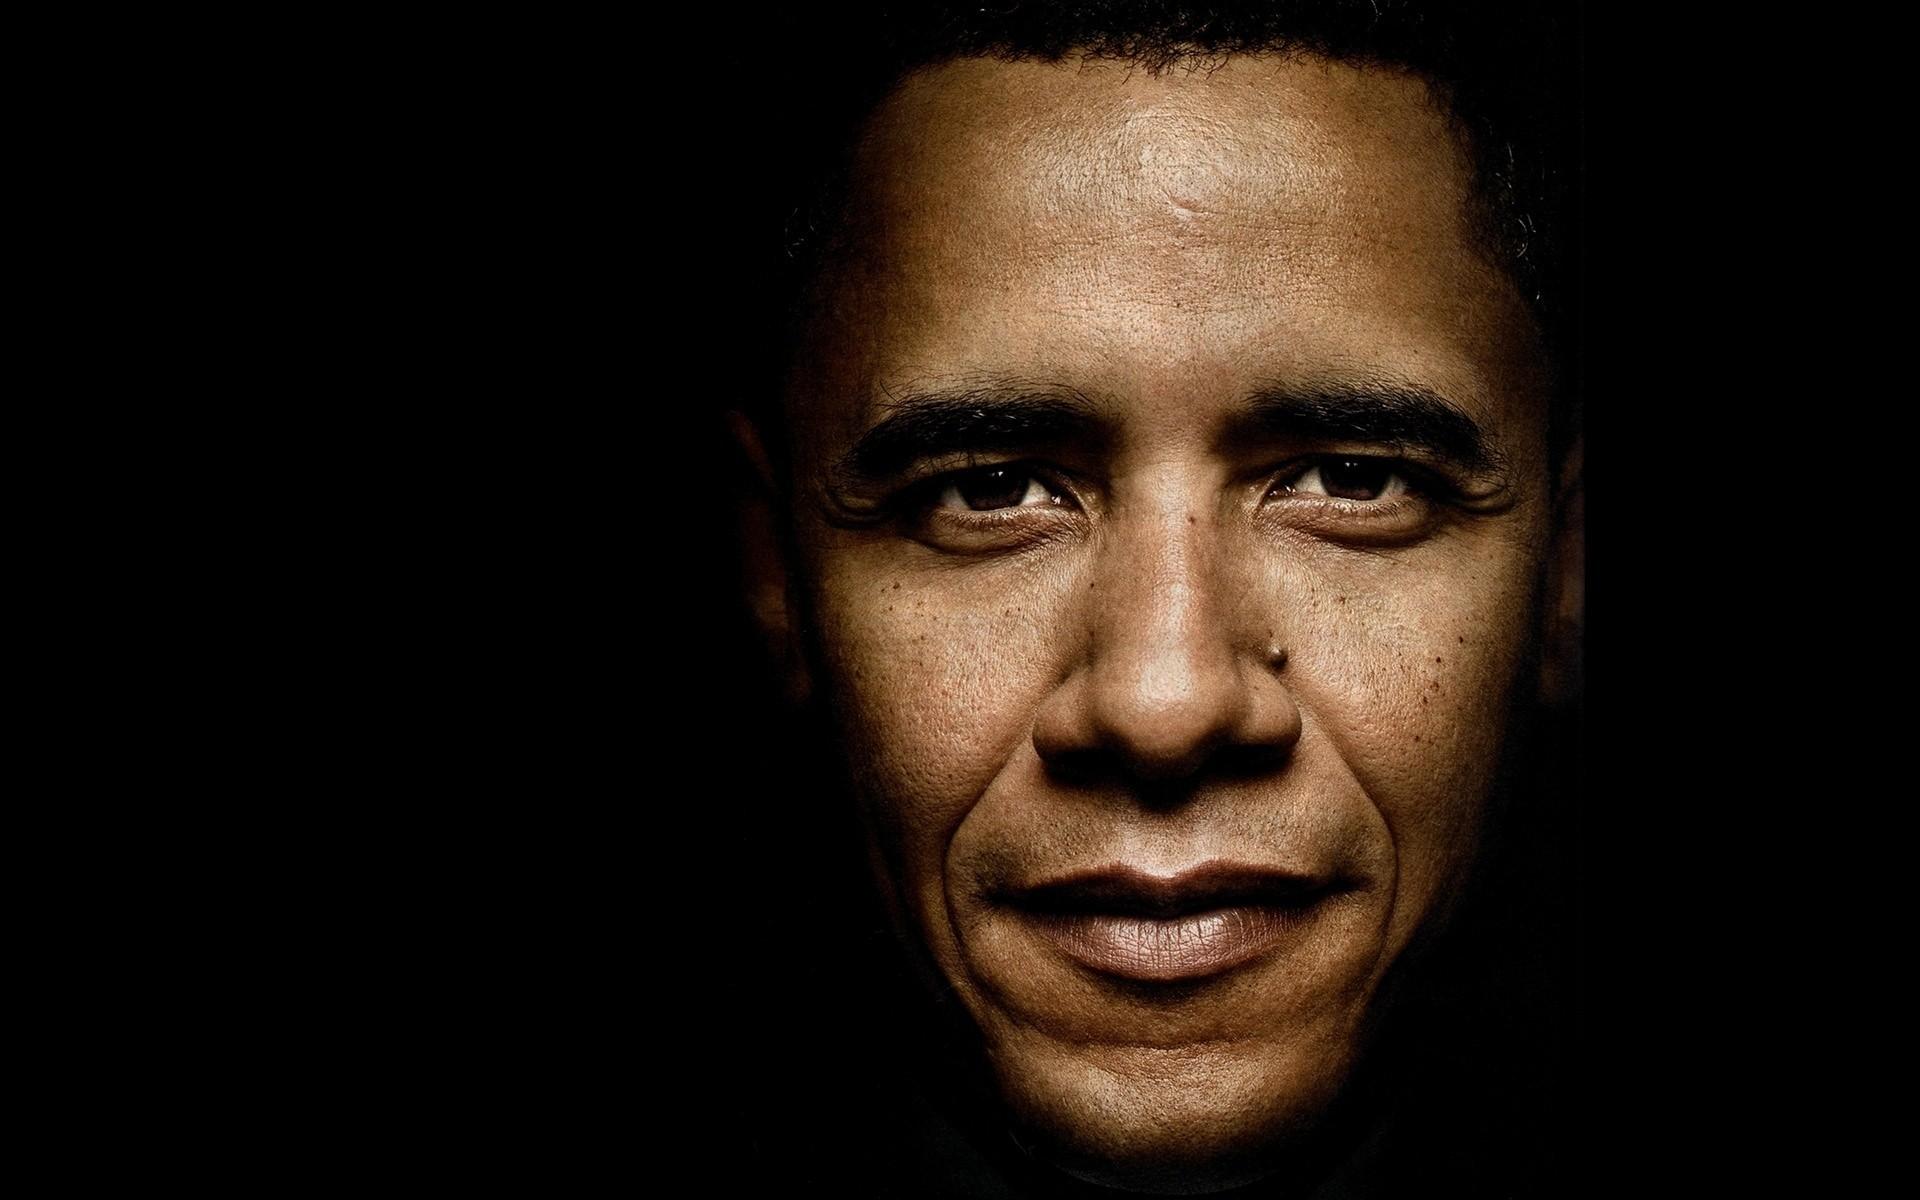 Barack Obama Close Up. iPhone wallpaper for free